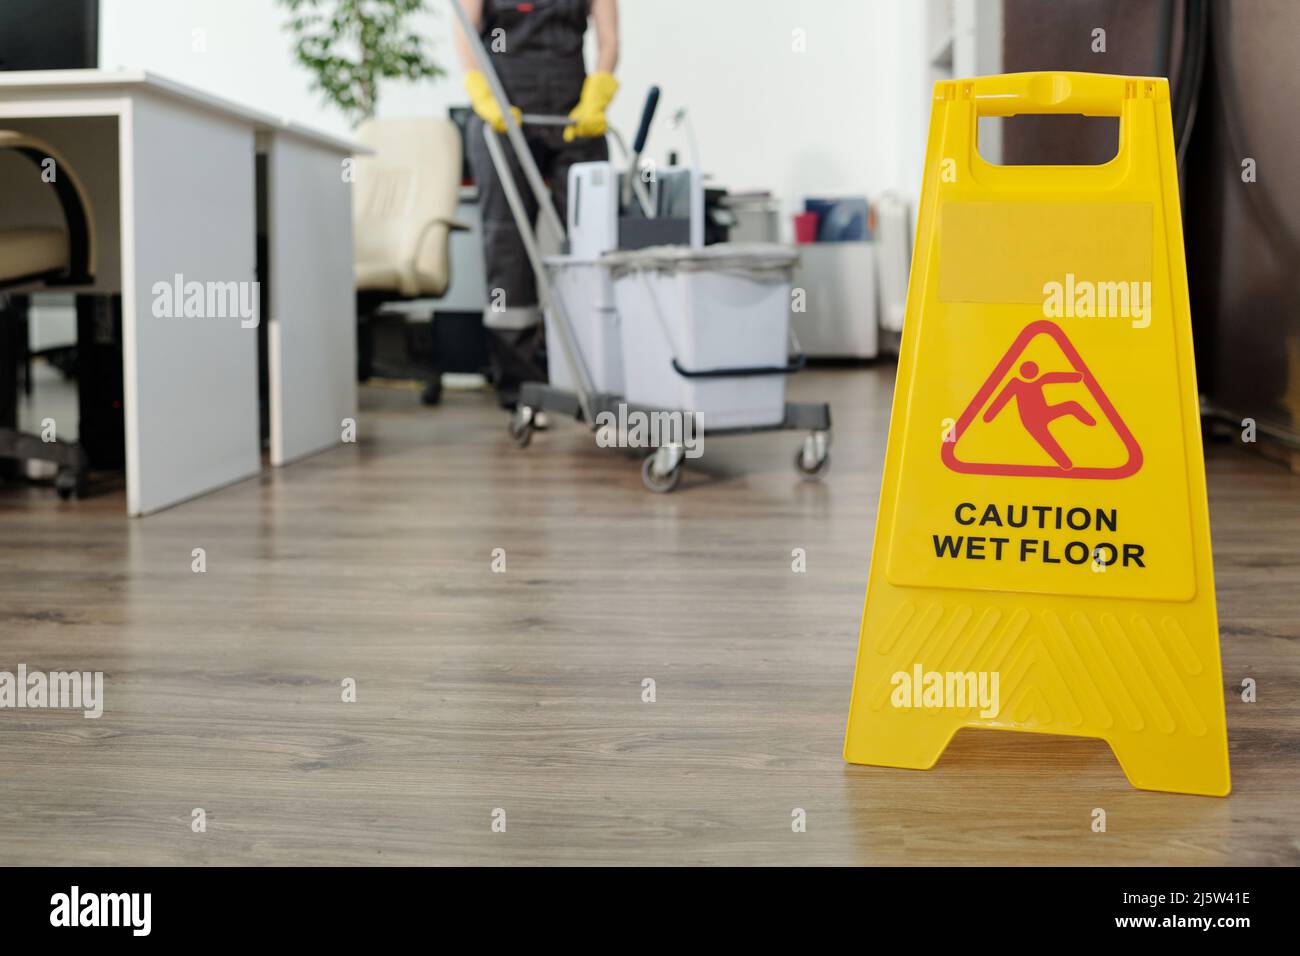 https://c8.alamy.com/comp/2J5W41E/caution-of-wet-floor-on-yellow-signboard-in-openspace-office-against-female-cleaner-pushing-janitor-cart-with-buckets-and-mop-2J5W41E.jpg